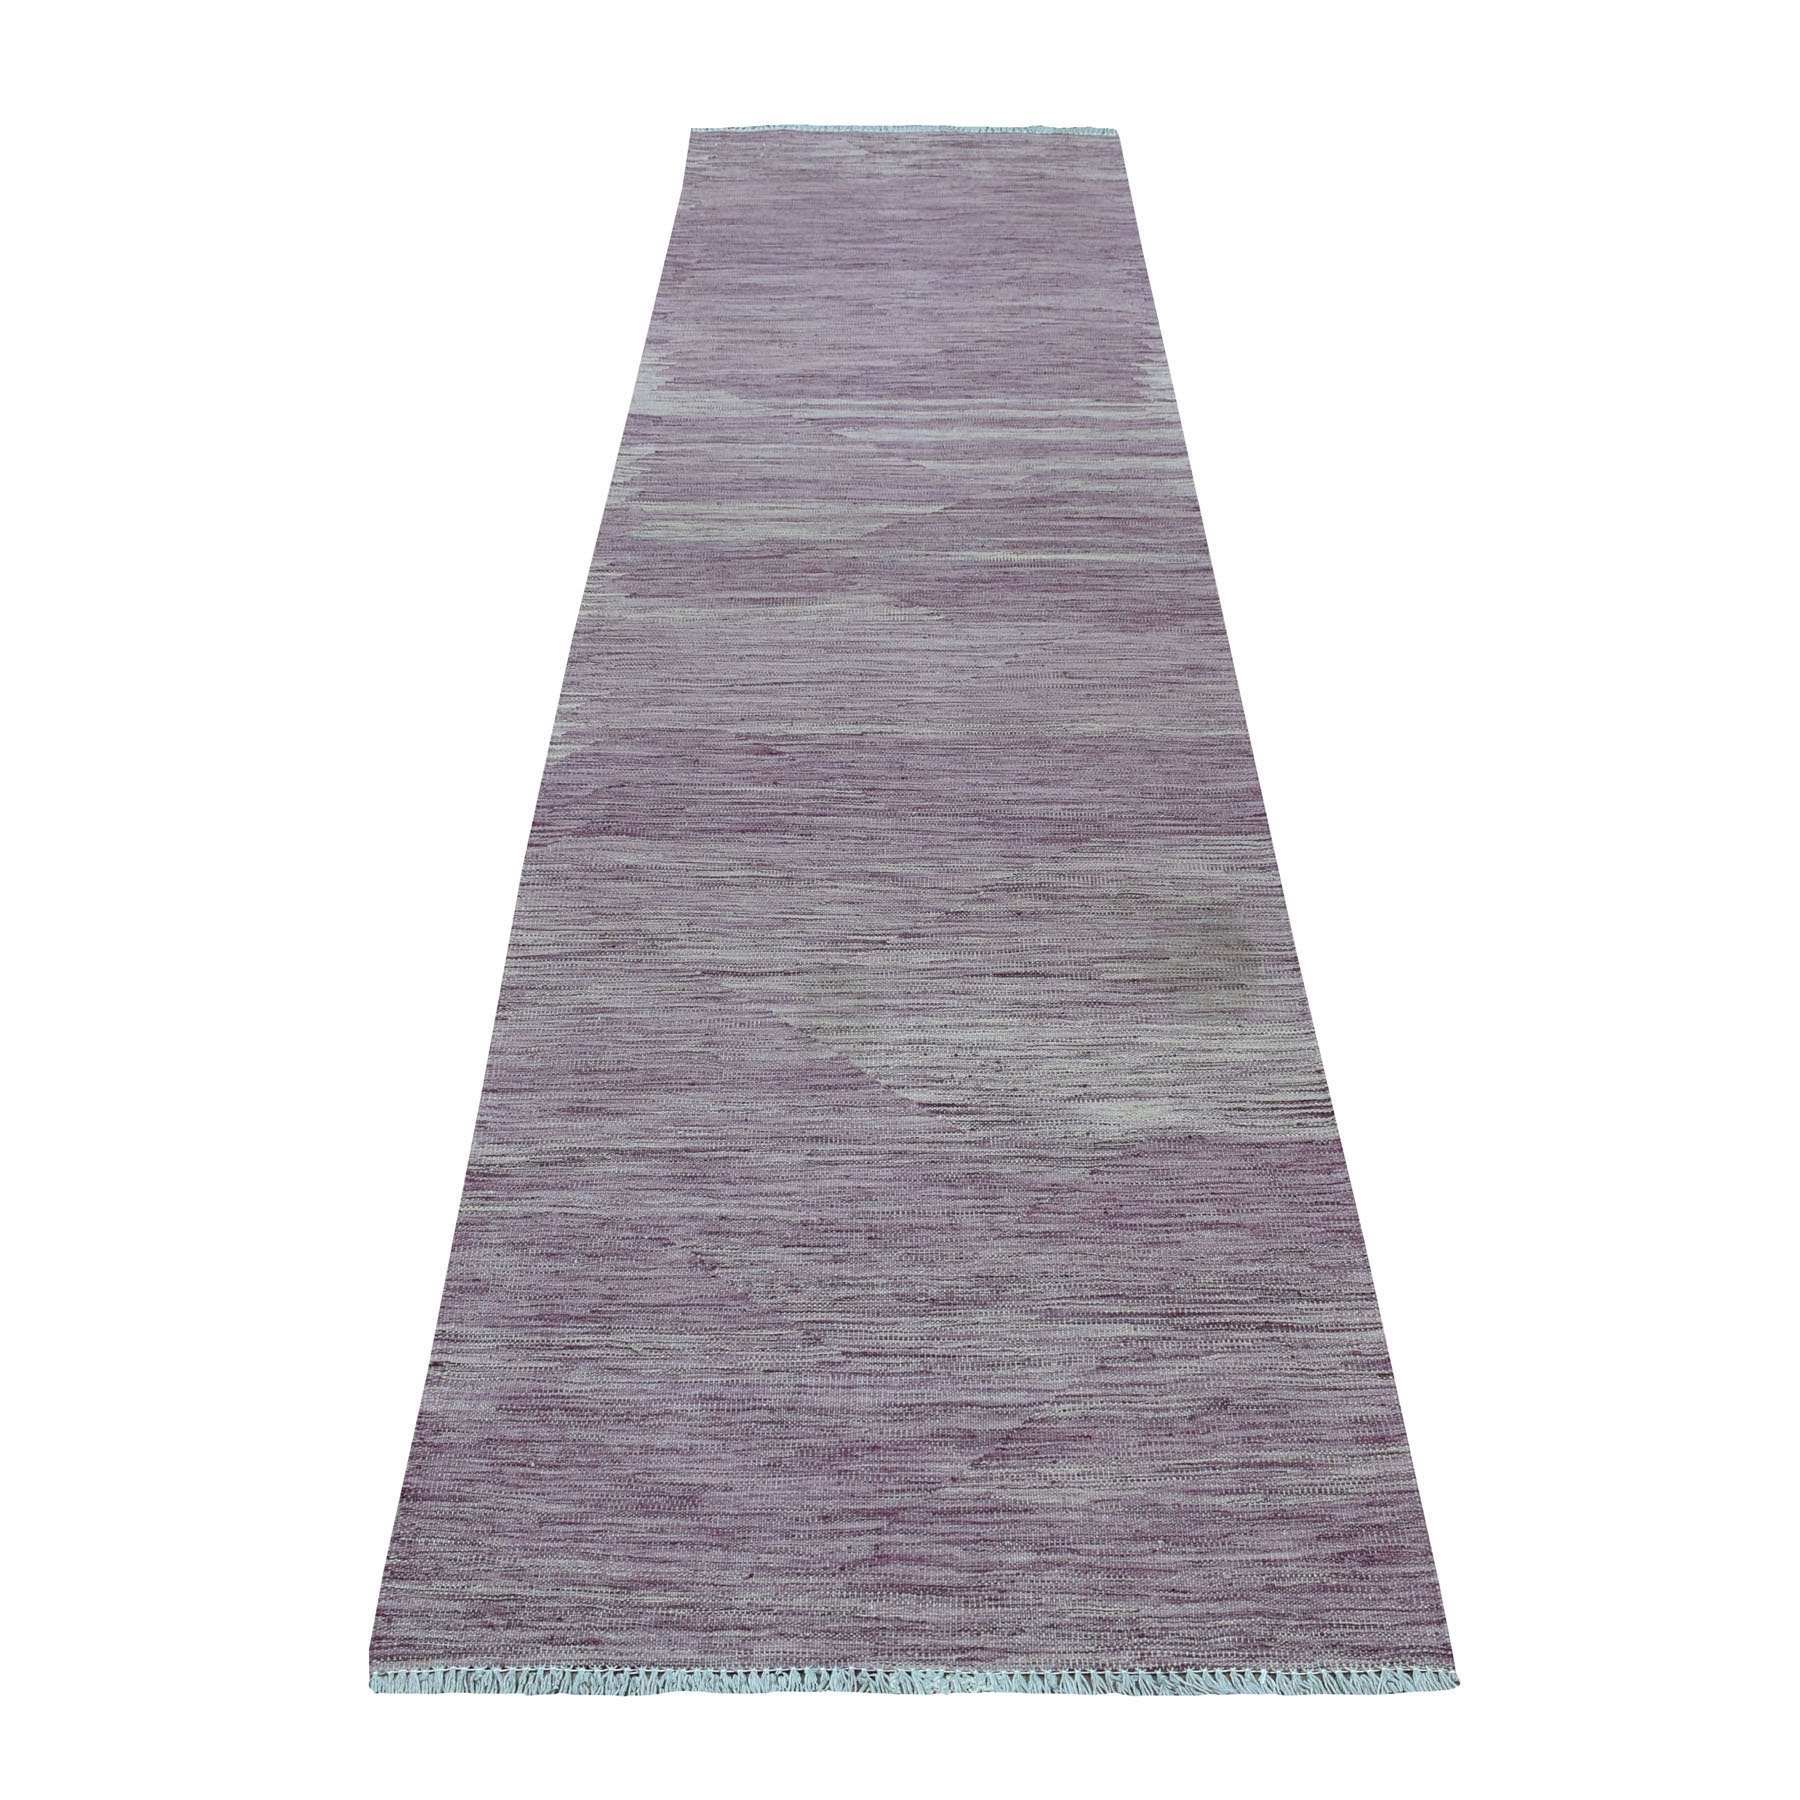 Modern & Contemporary Wool Hand-Woven Area Rug 2'8